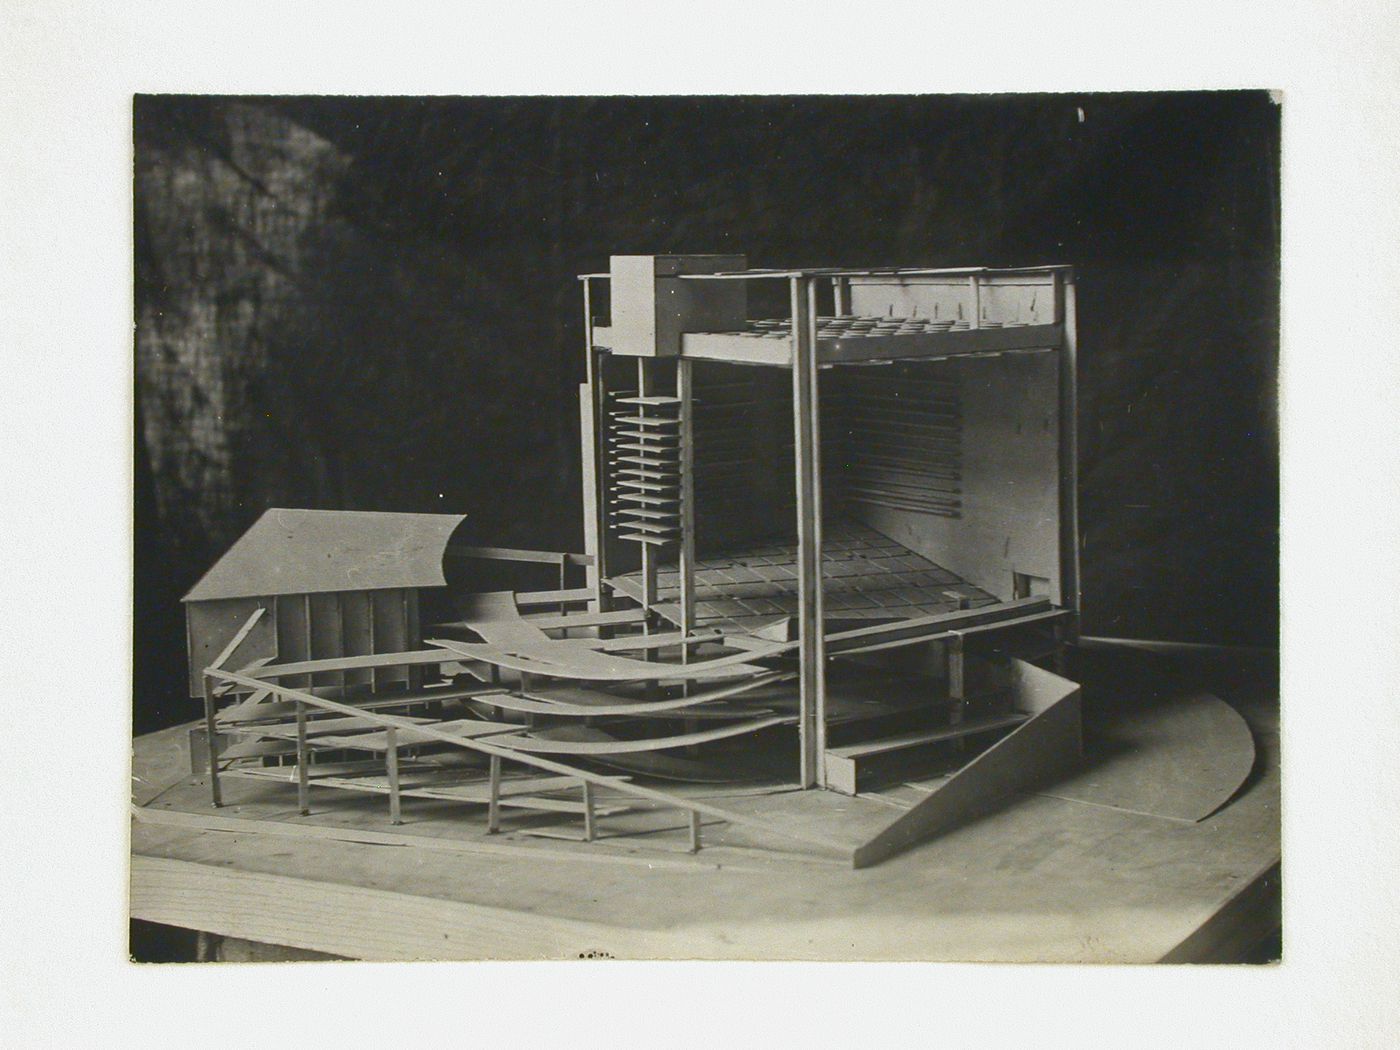 Photograph of a model for a Palace of Soviets, Moscow